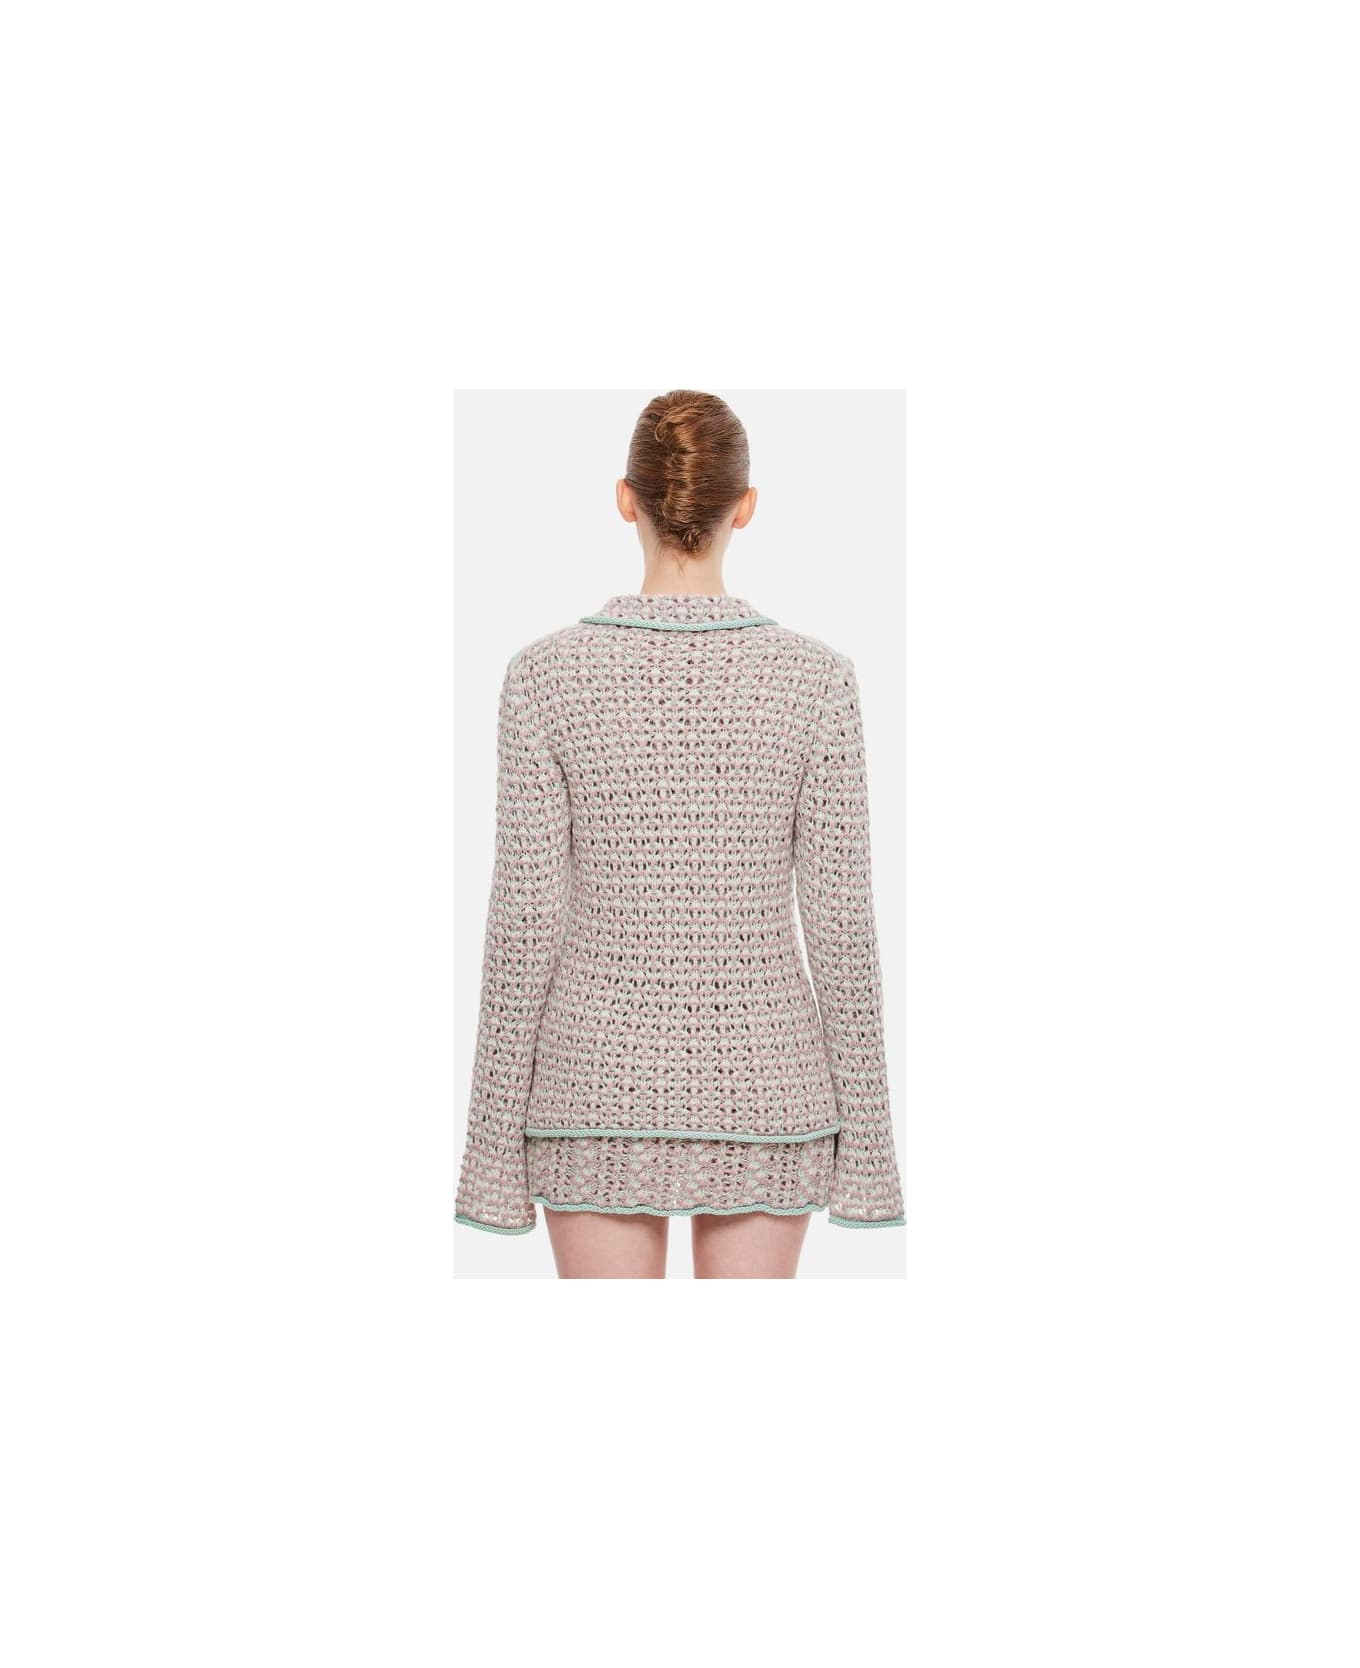 Marco Rambaldi Multicolor Braided Knitted Shirt - Rose